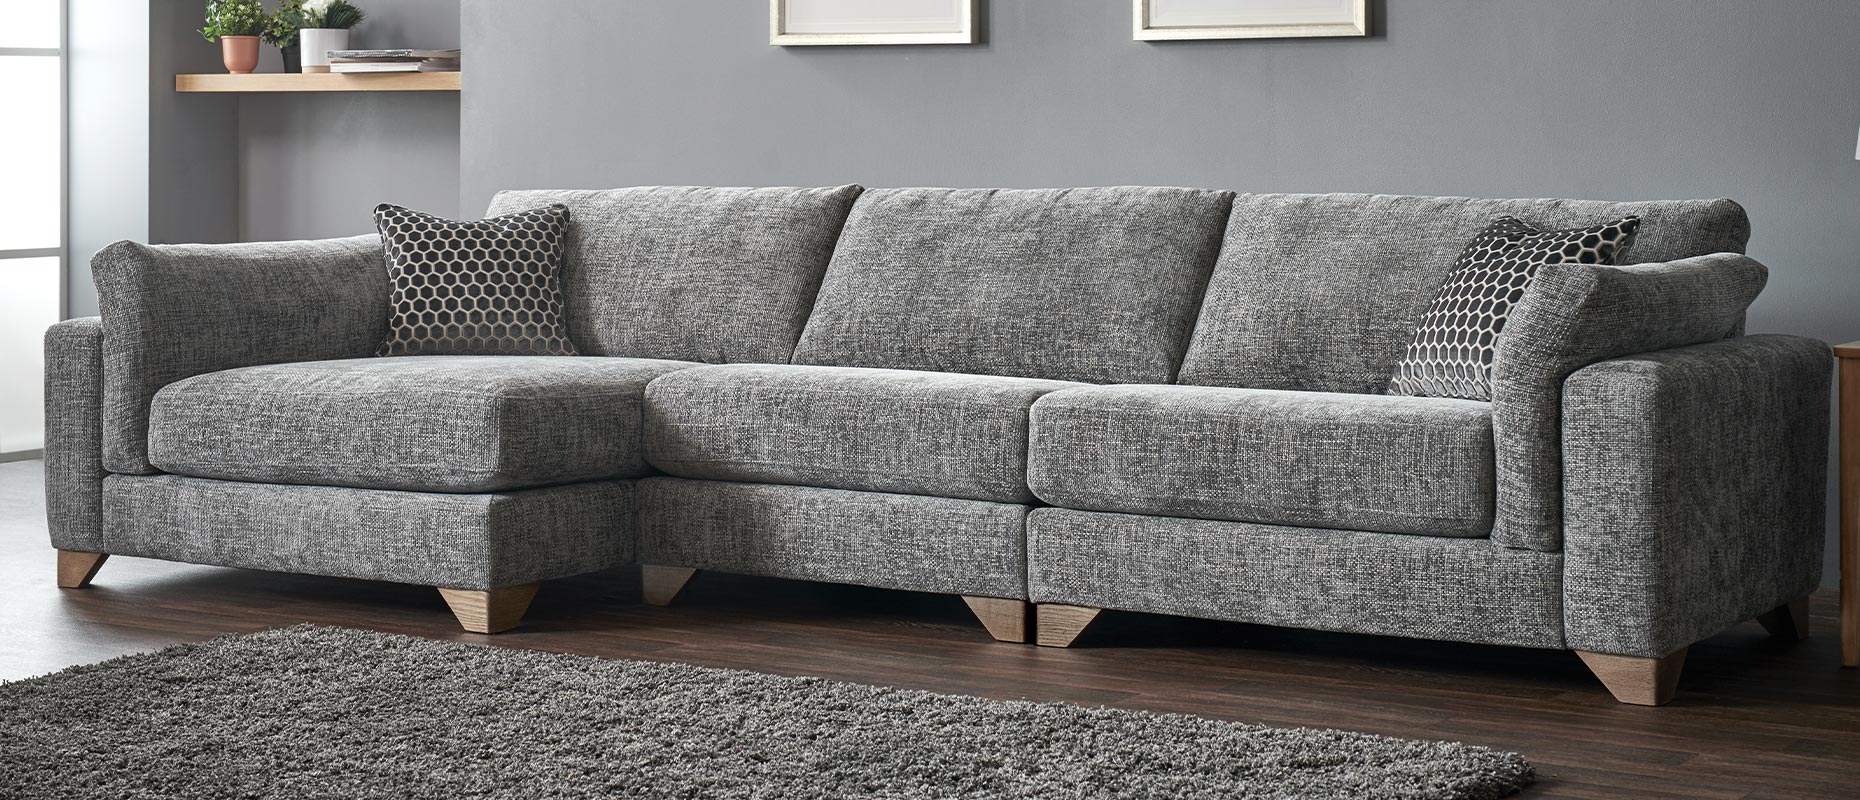 Sandown sofa collection at Forrest Furnishing